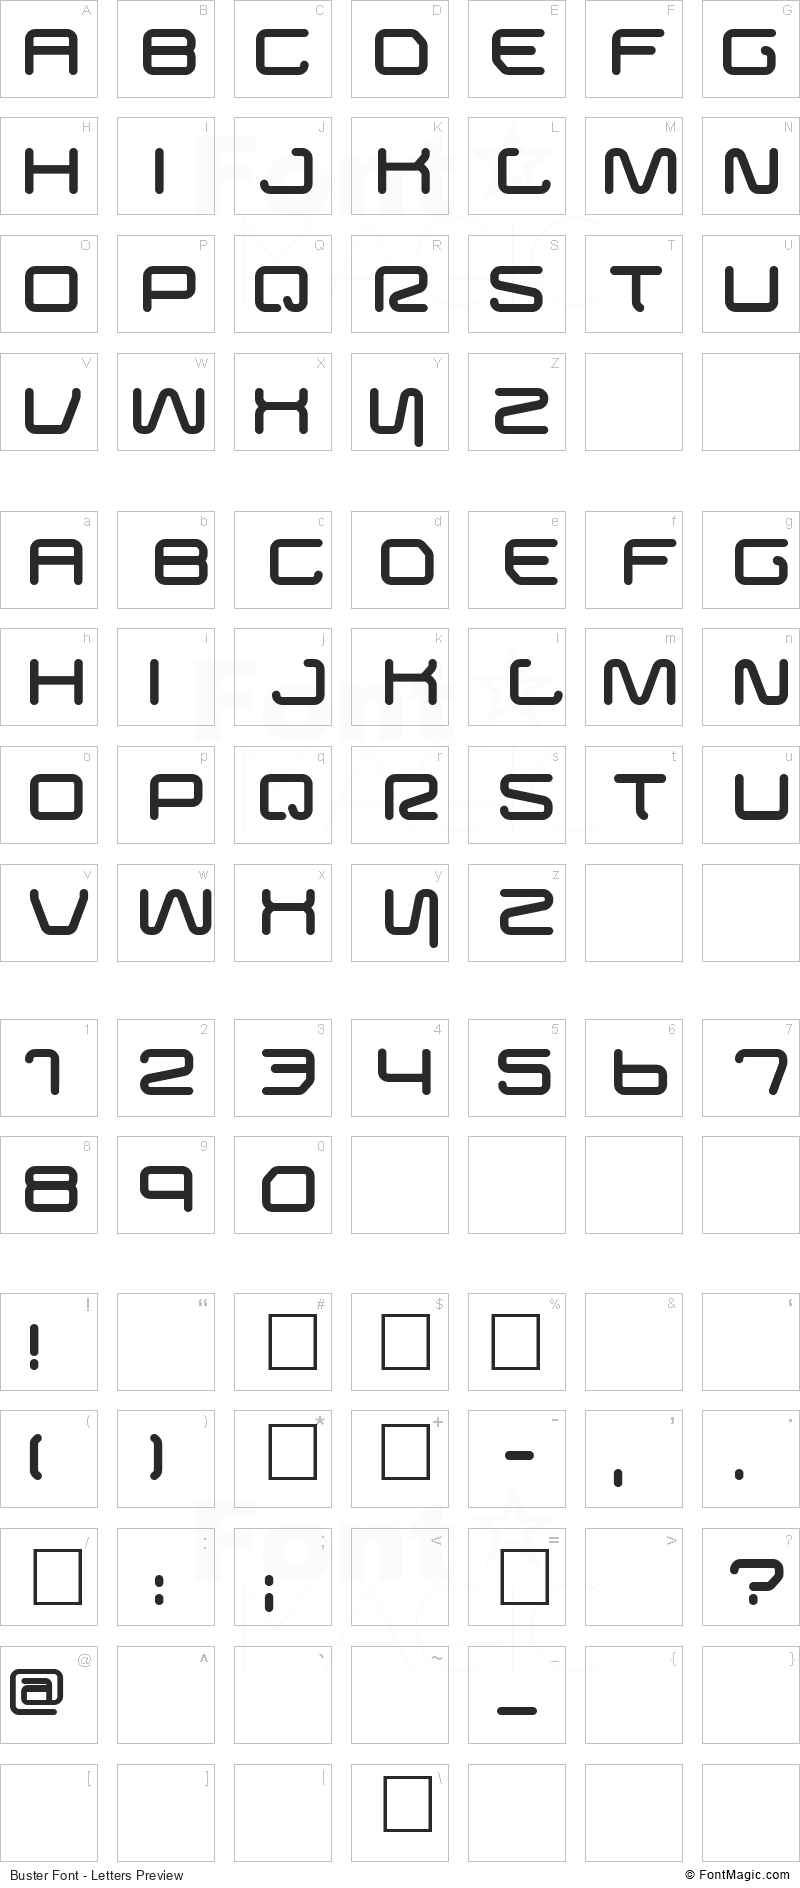 Buster Font - All Latters Preview Chart